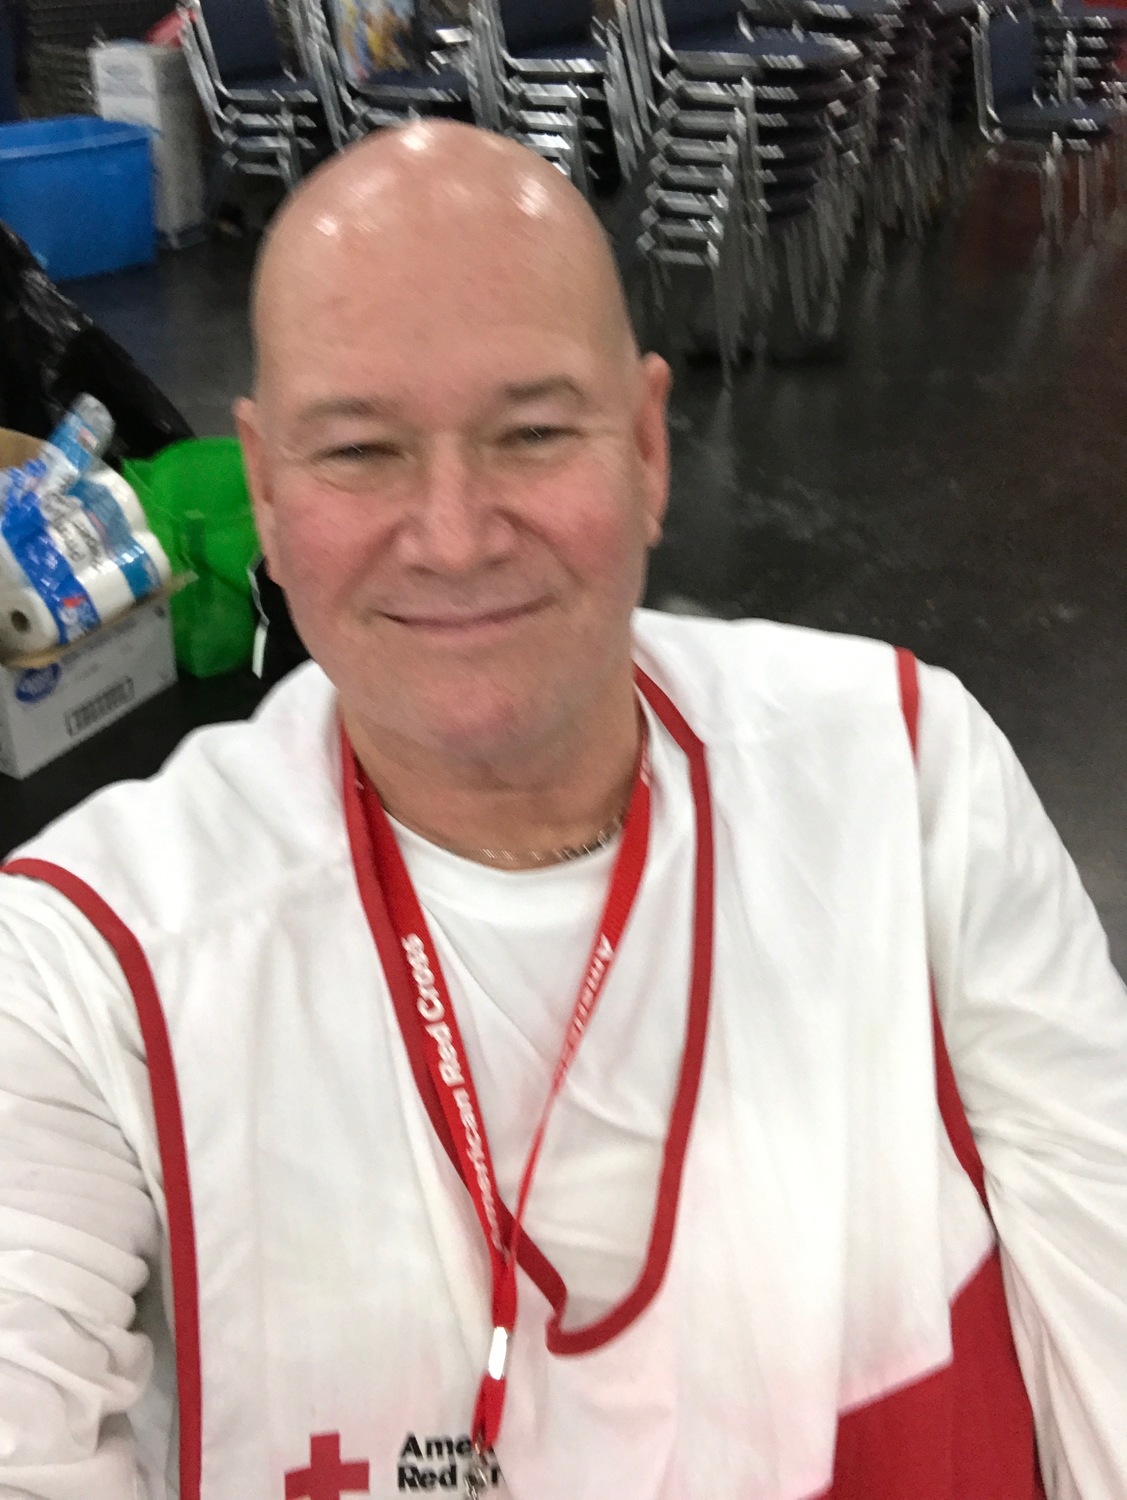 Gallery Photo of I love being a Mental Health Disaster Volunteer for the Red Cross.  This shot is from Hurricane Harvey.